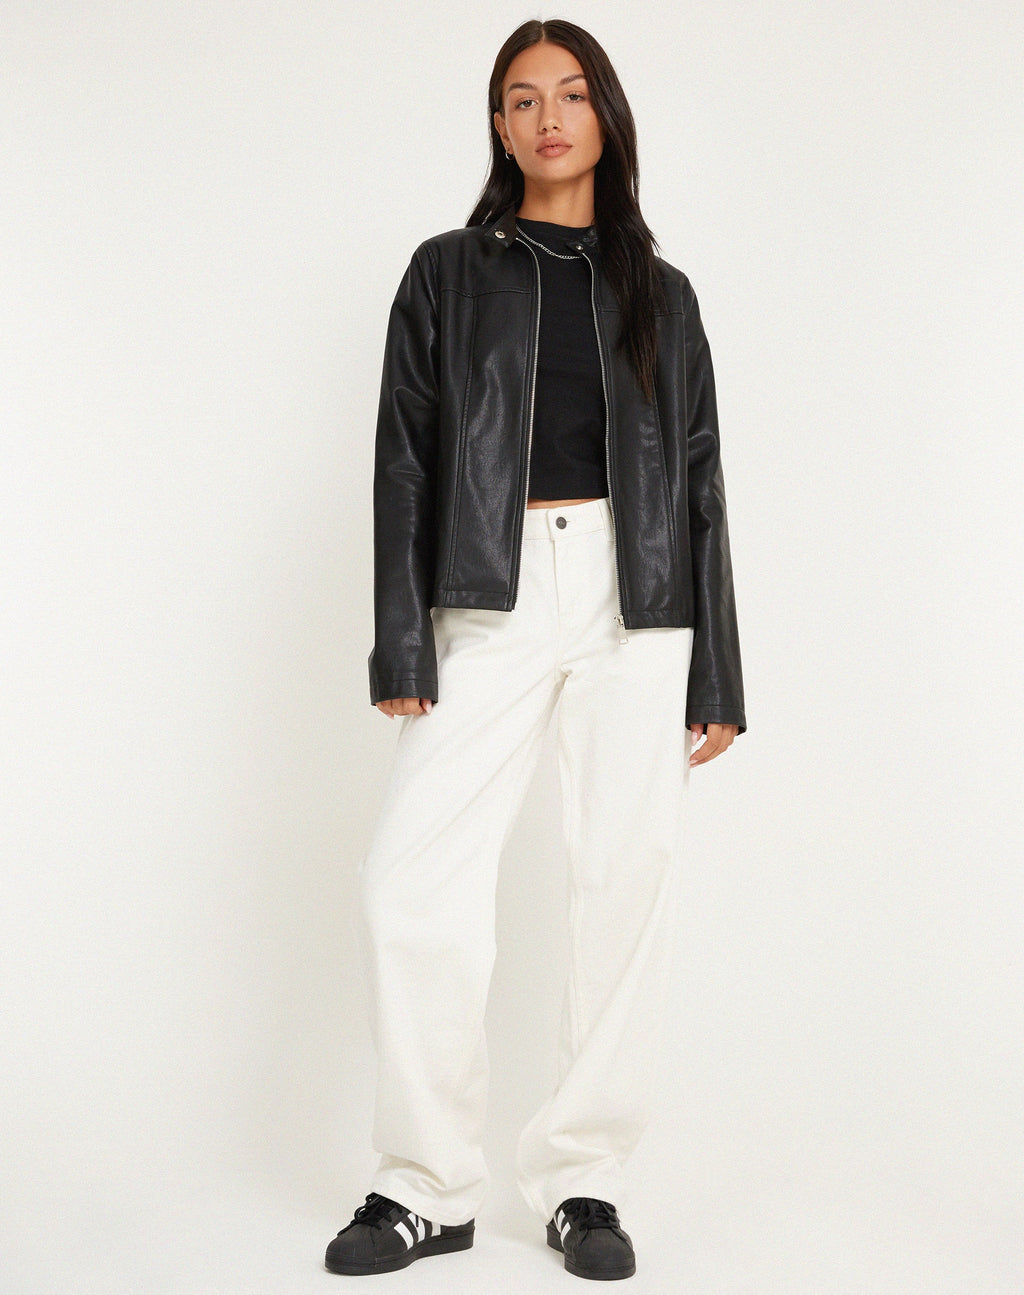 MOTEL X BARBARA Low Rise Parallel Jeans in True White